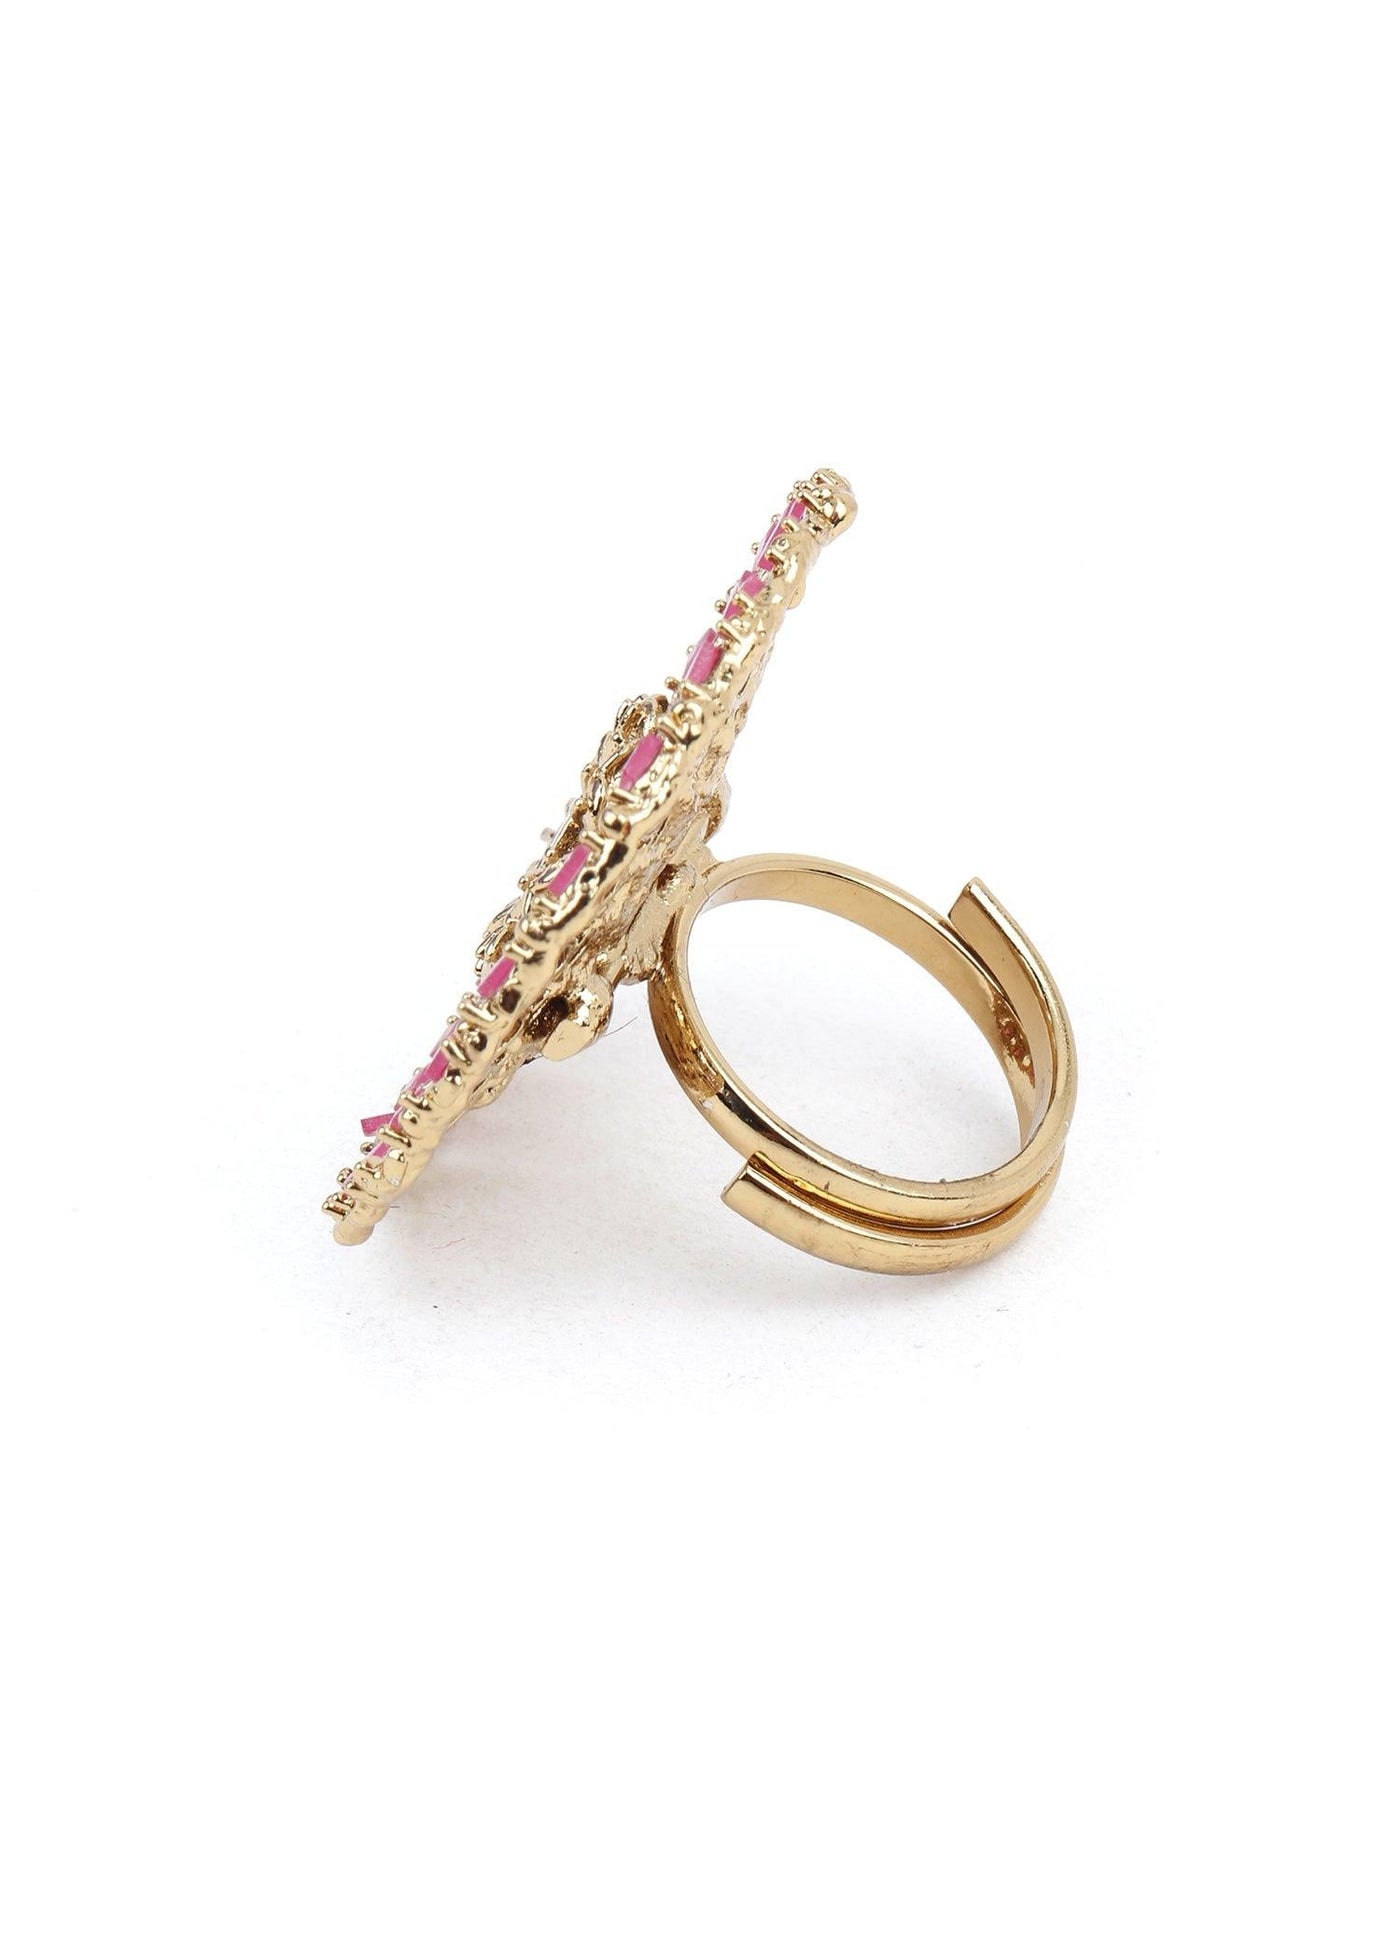 Traditional Round Pink and Gold Platted Ring - Odette